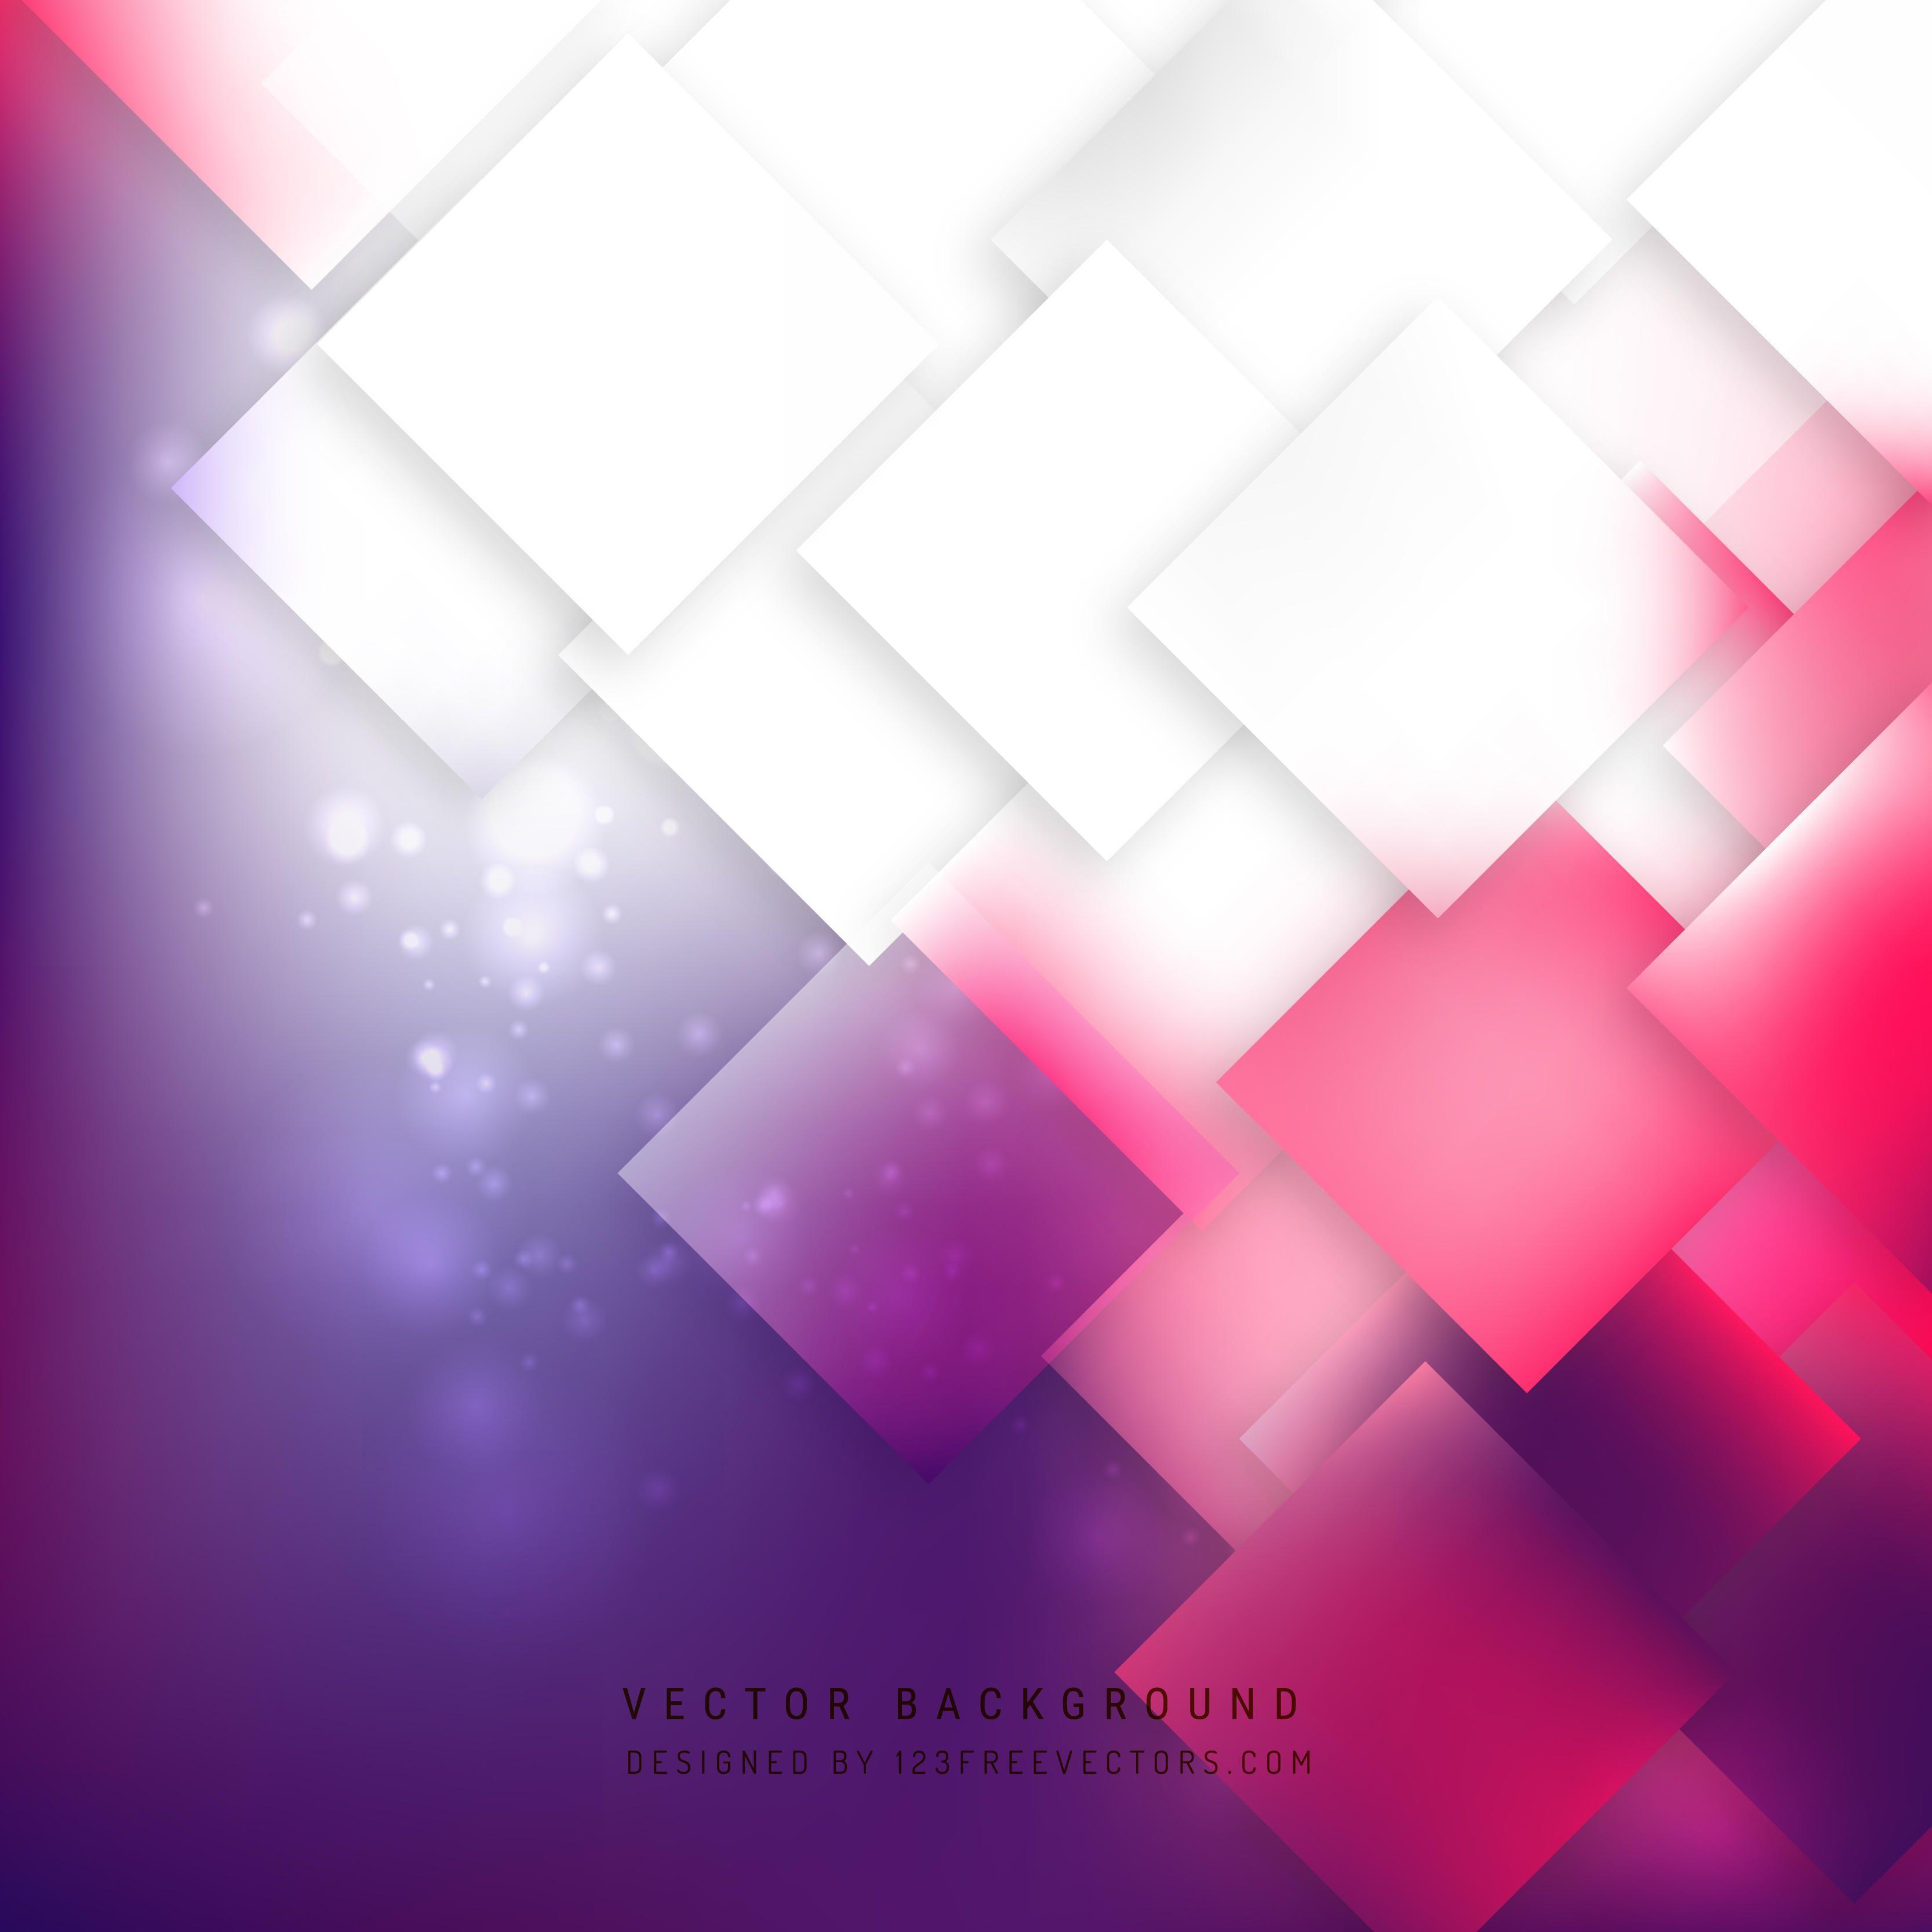 Pink and Purple Background Designs Vectors. Download Free